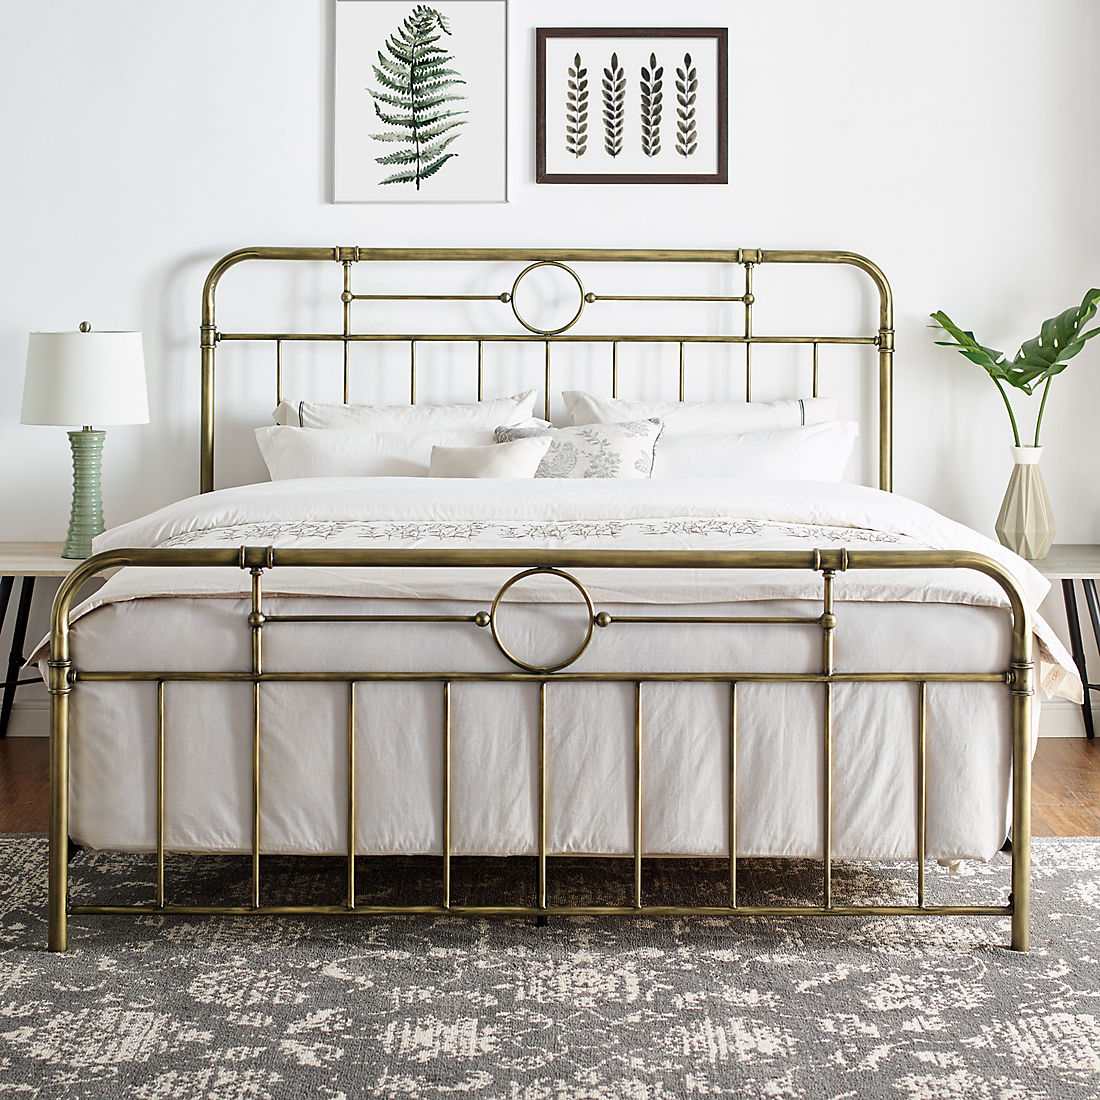 Bohemian King Size Metal Pipe Bed Frame, A King Size Bed Frame